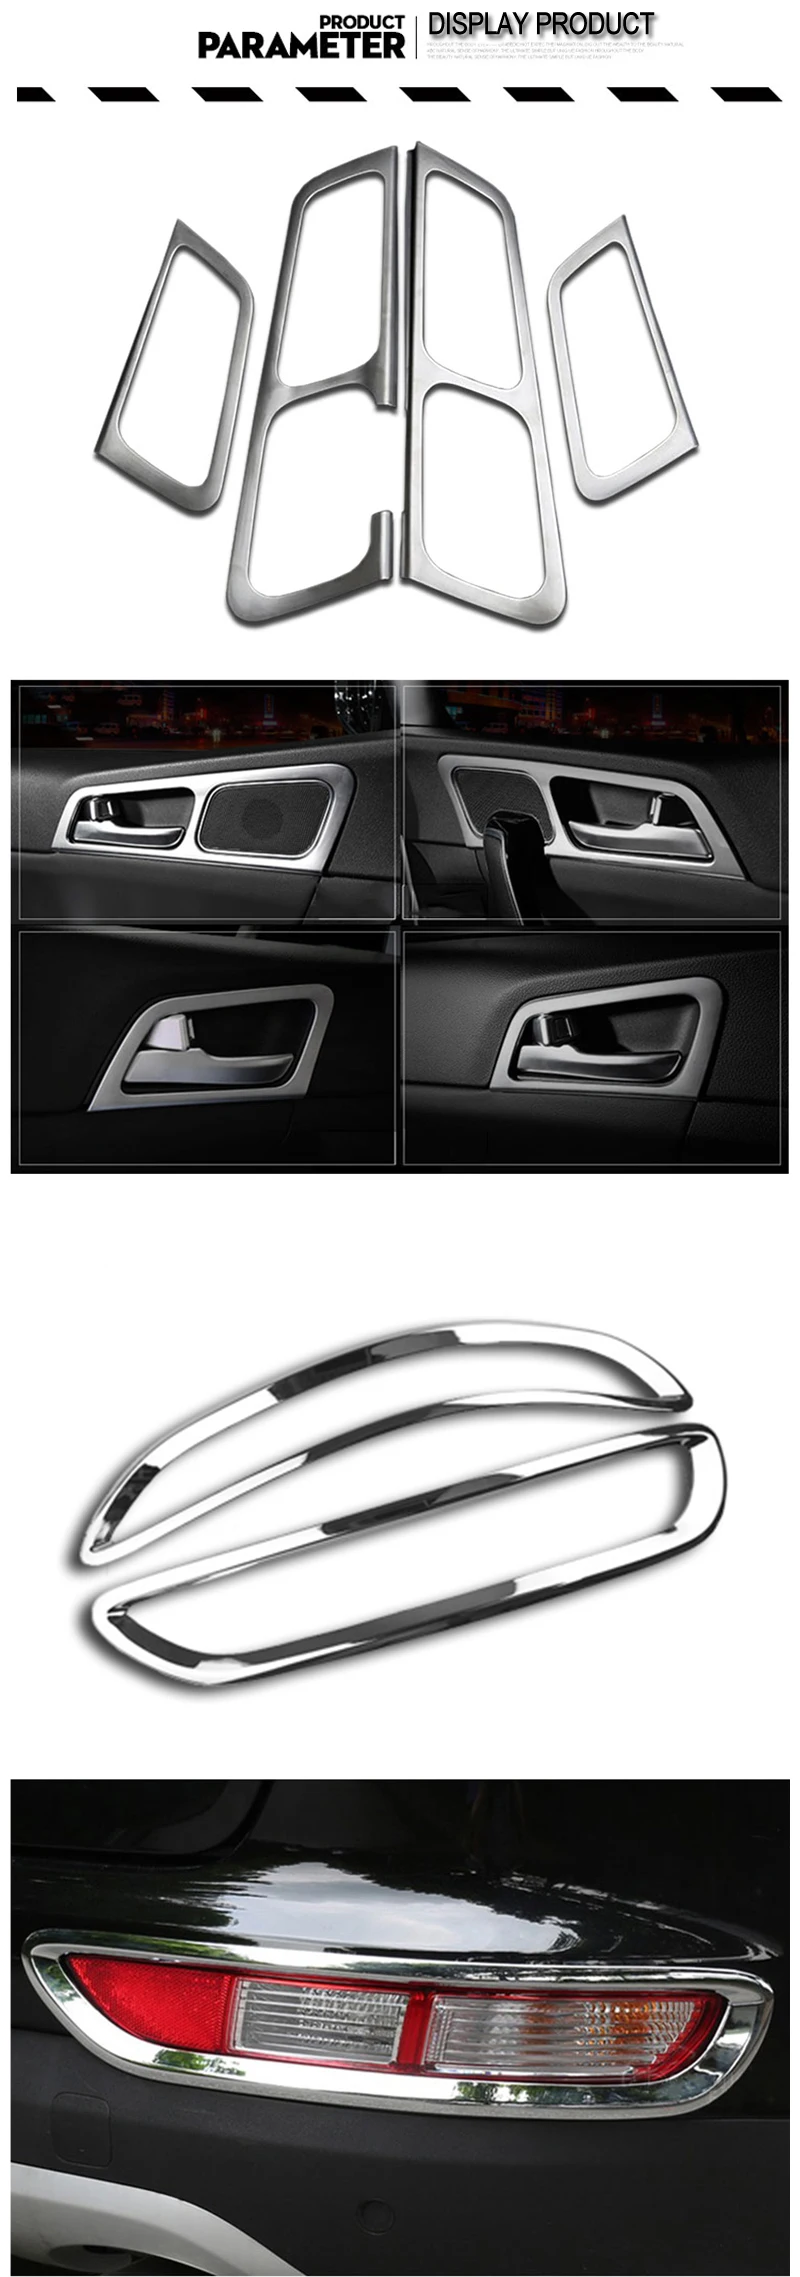 2For LHD KIA Sportage 4 QL 2018 2017 2016 ABS Chrome Accessories Automobile Car Styling Interior Door Window Chromes Cover In Car